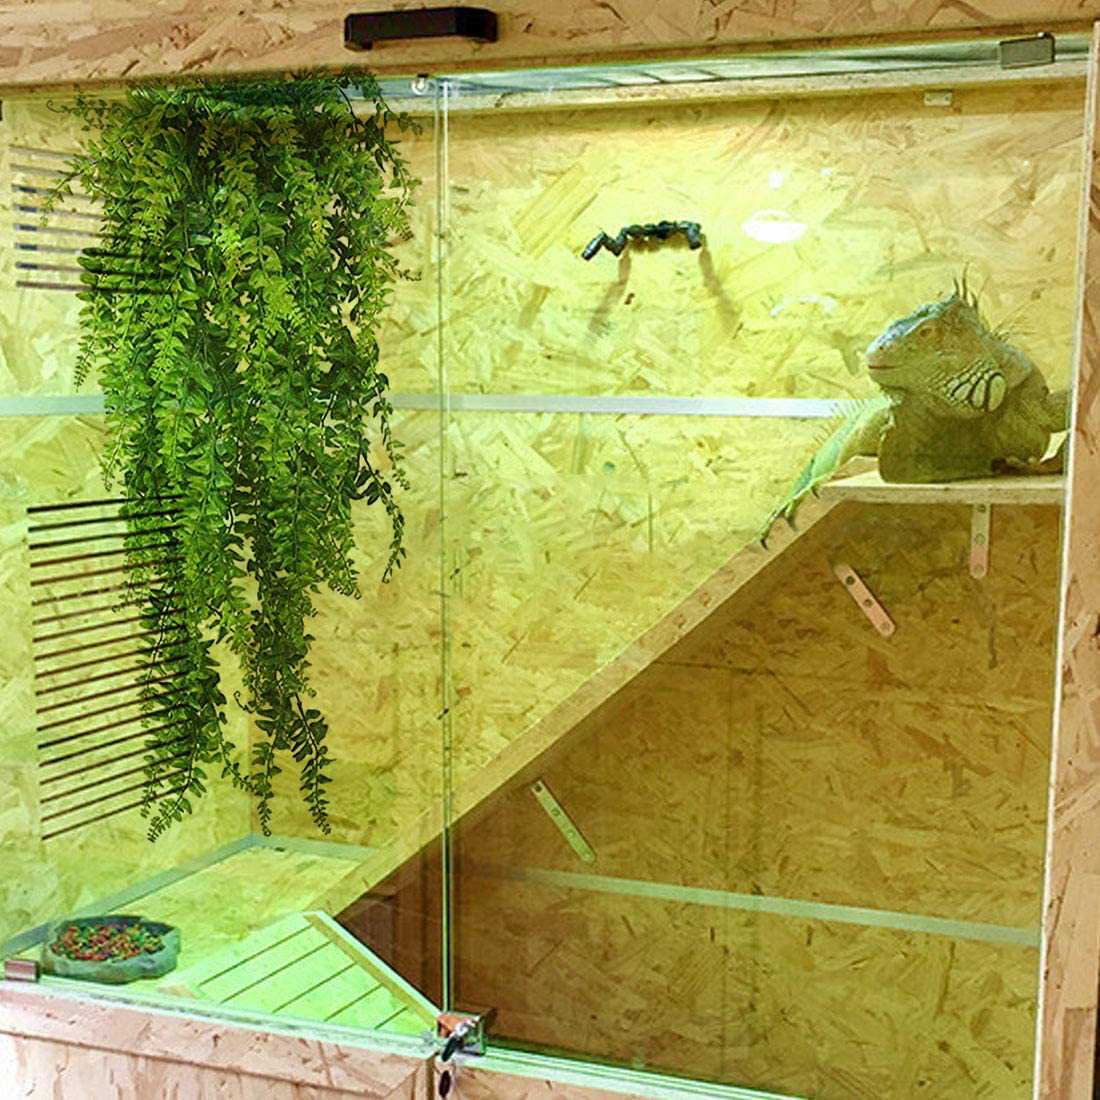 PINVNBY Bearded Dragon Tank Accessories,Reptile Plants Hanging Climbing,Lizards Habitat Natural Seagrass Hammock and Artificial Bendable Vines Branch for Chameleon Geckos Snake and Hermit Crabs Animals & Pet Supplies > Pet Supplies > Reptile & Amphibian Supplies > Reptile & Amphibian Habitat Accessories PINVNBY   